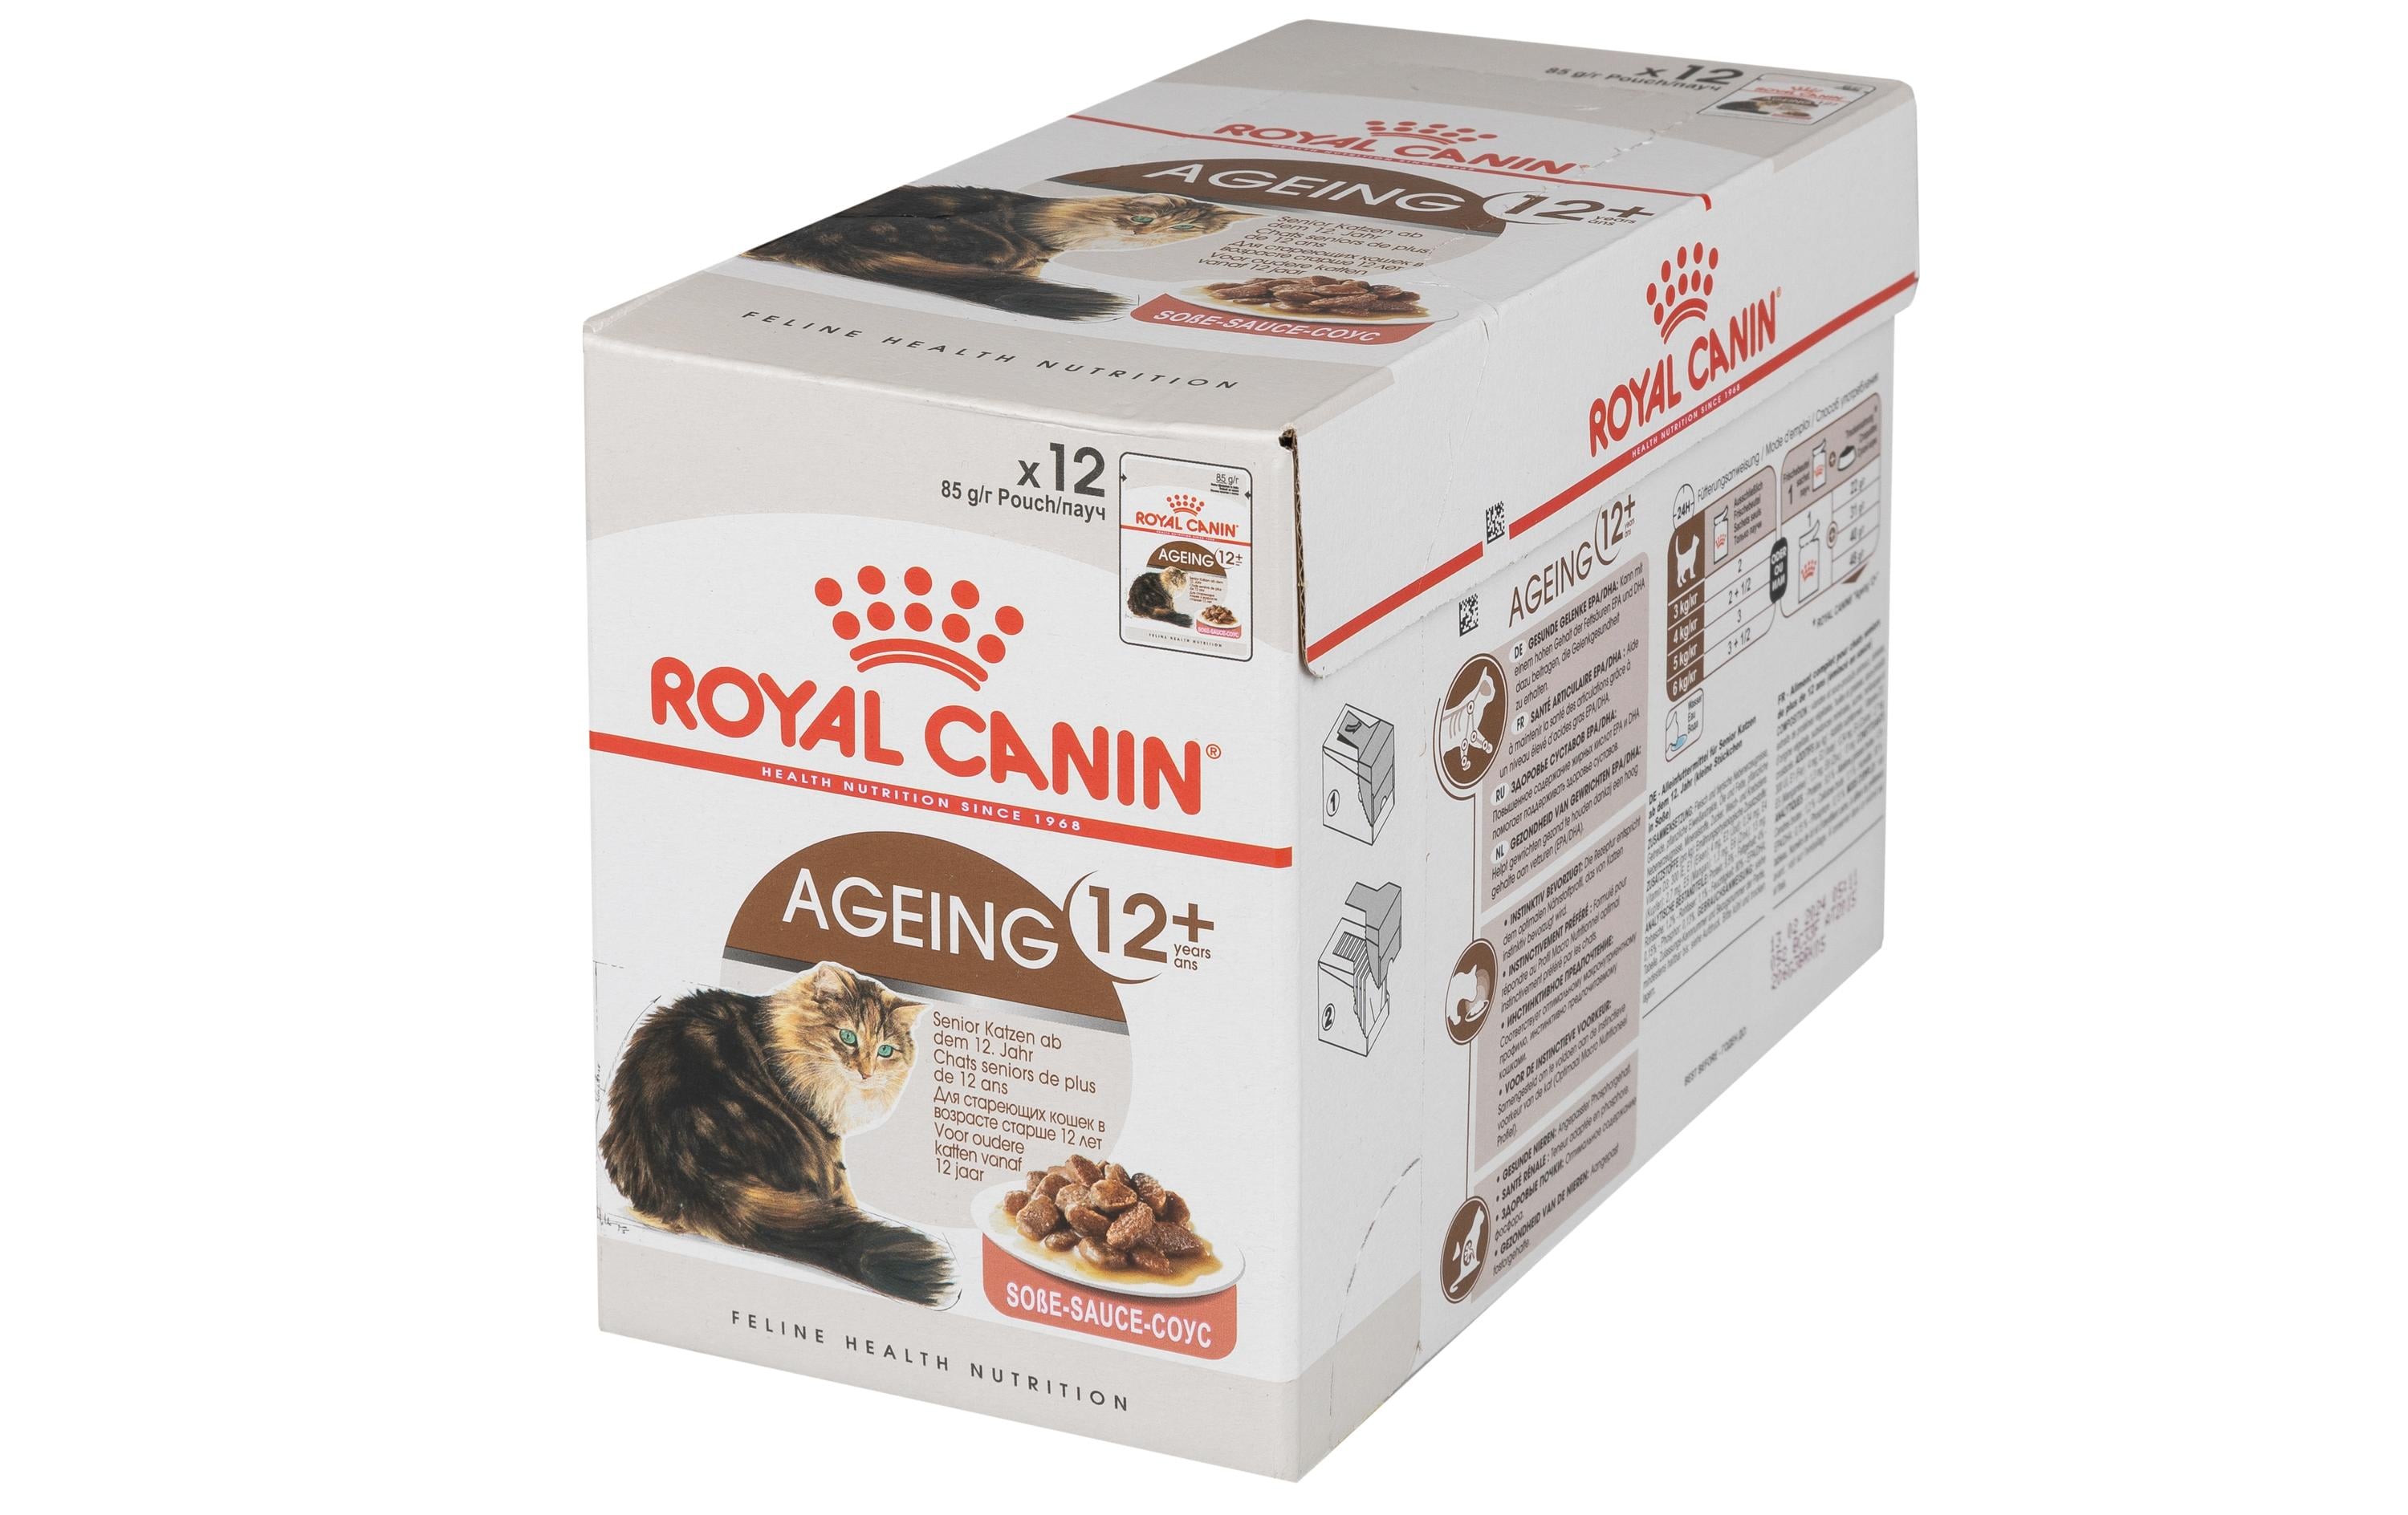 Royal Canin Nassfutter Ageing 12+ in Sosse, 12 x 85 g